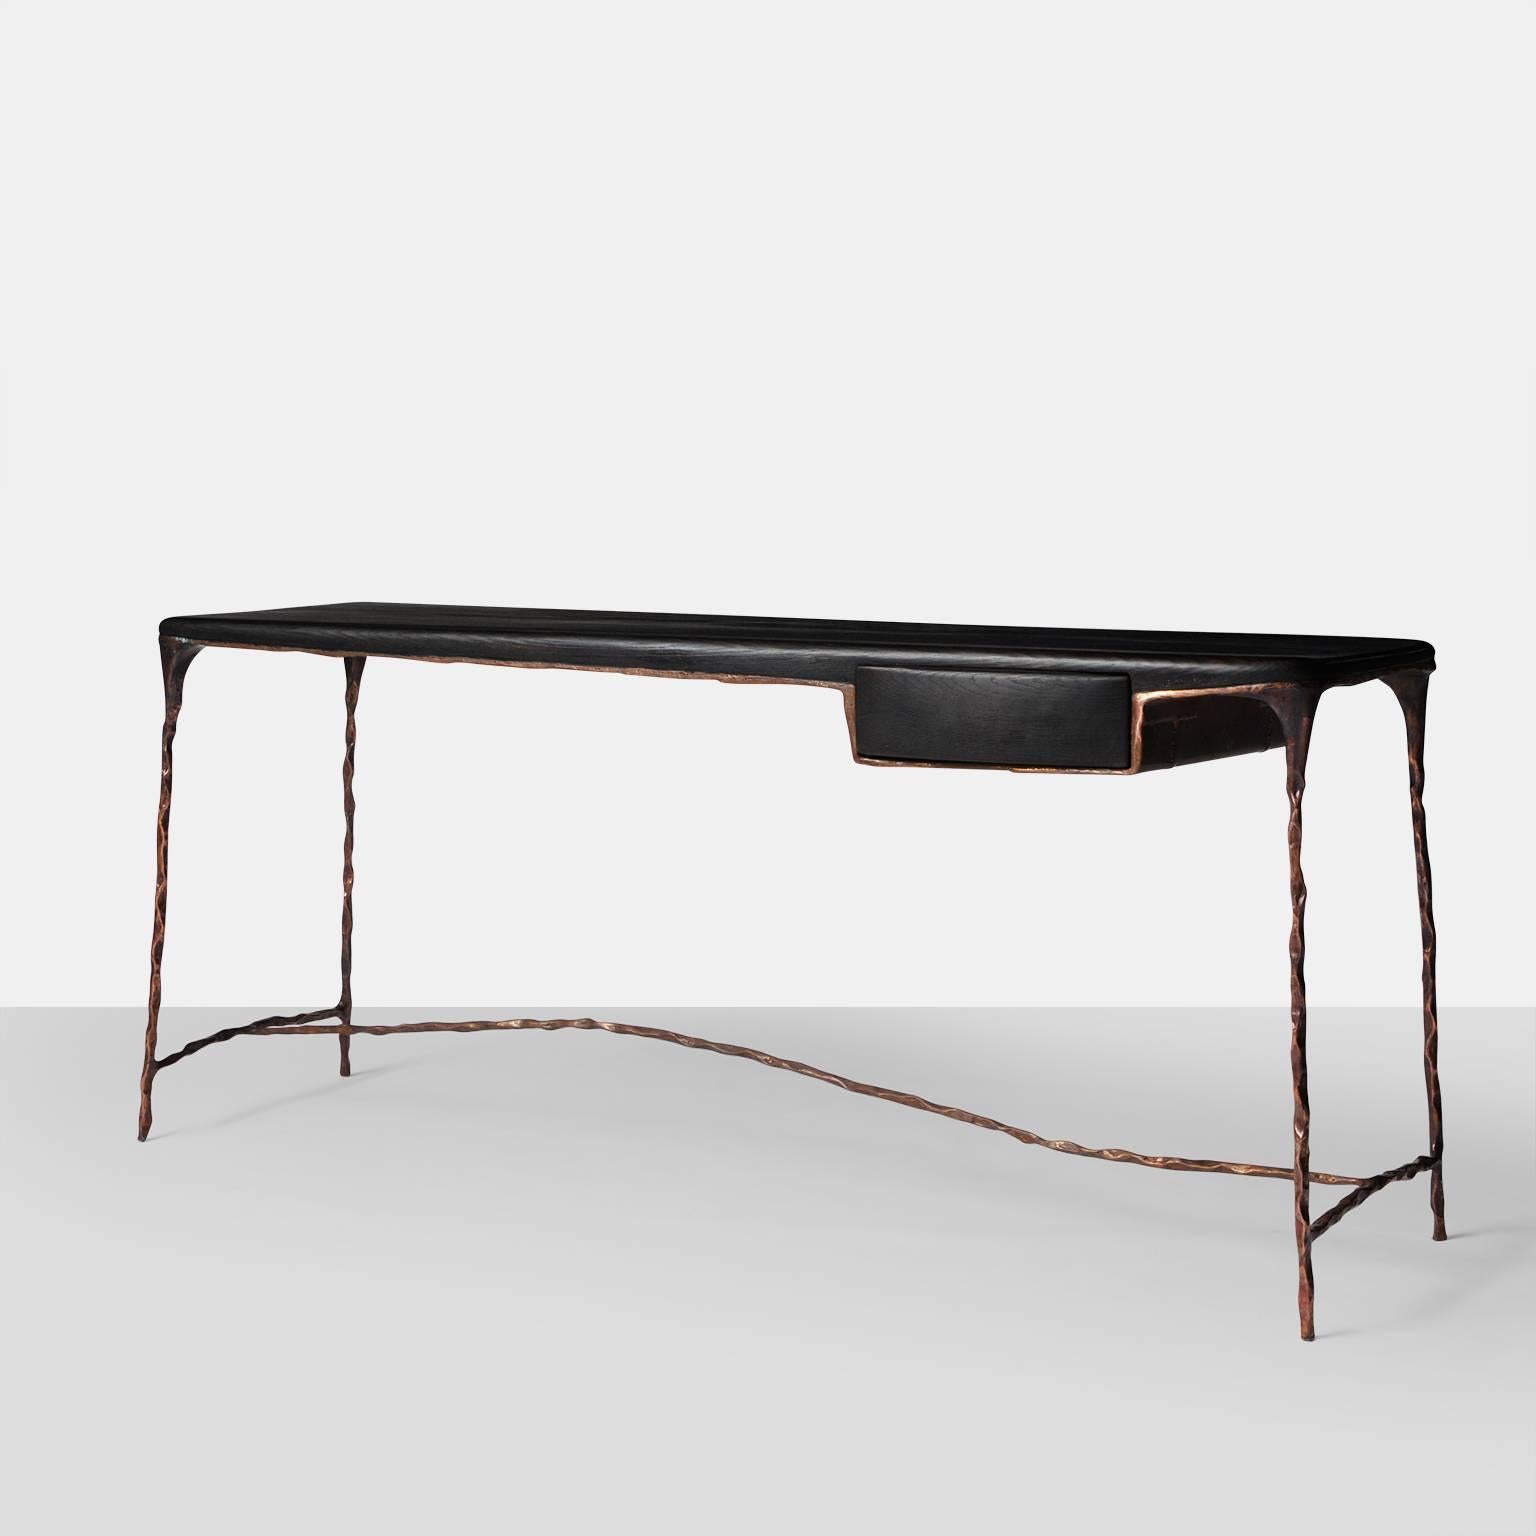 A copper frame desk with a blackened oak top and a single drawer. Completely handmade and all copper work has been hand-forged with exceptional detail on the underside. Opposite side of desk has a false drawer so that it can view from both sides. 